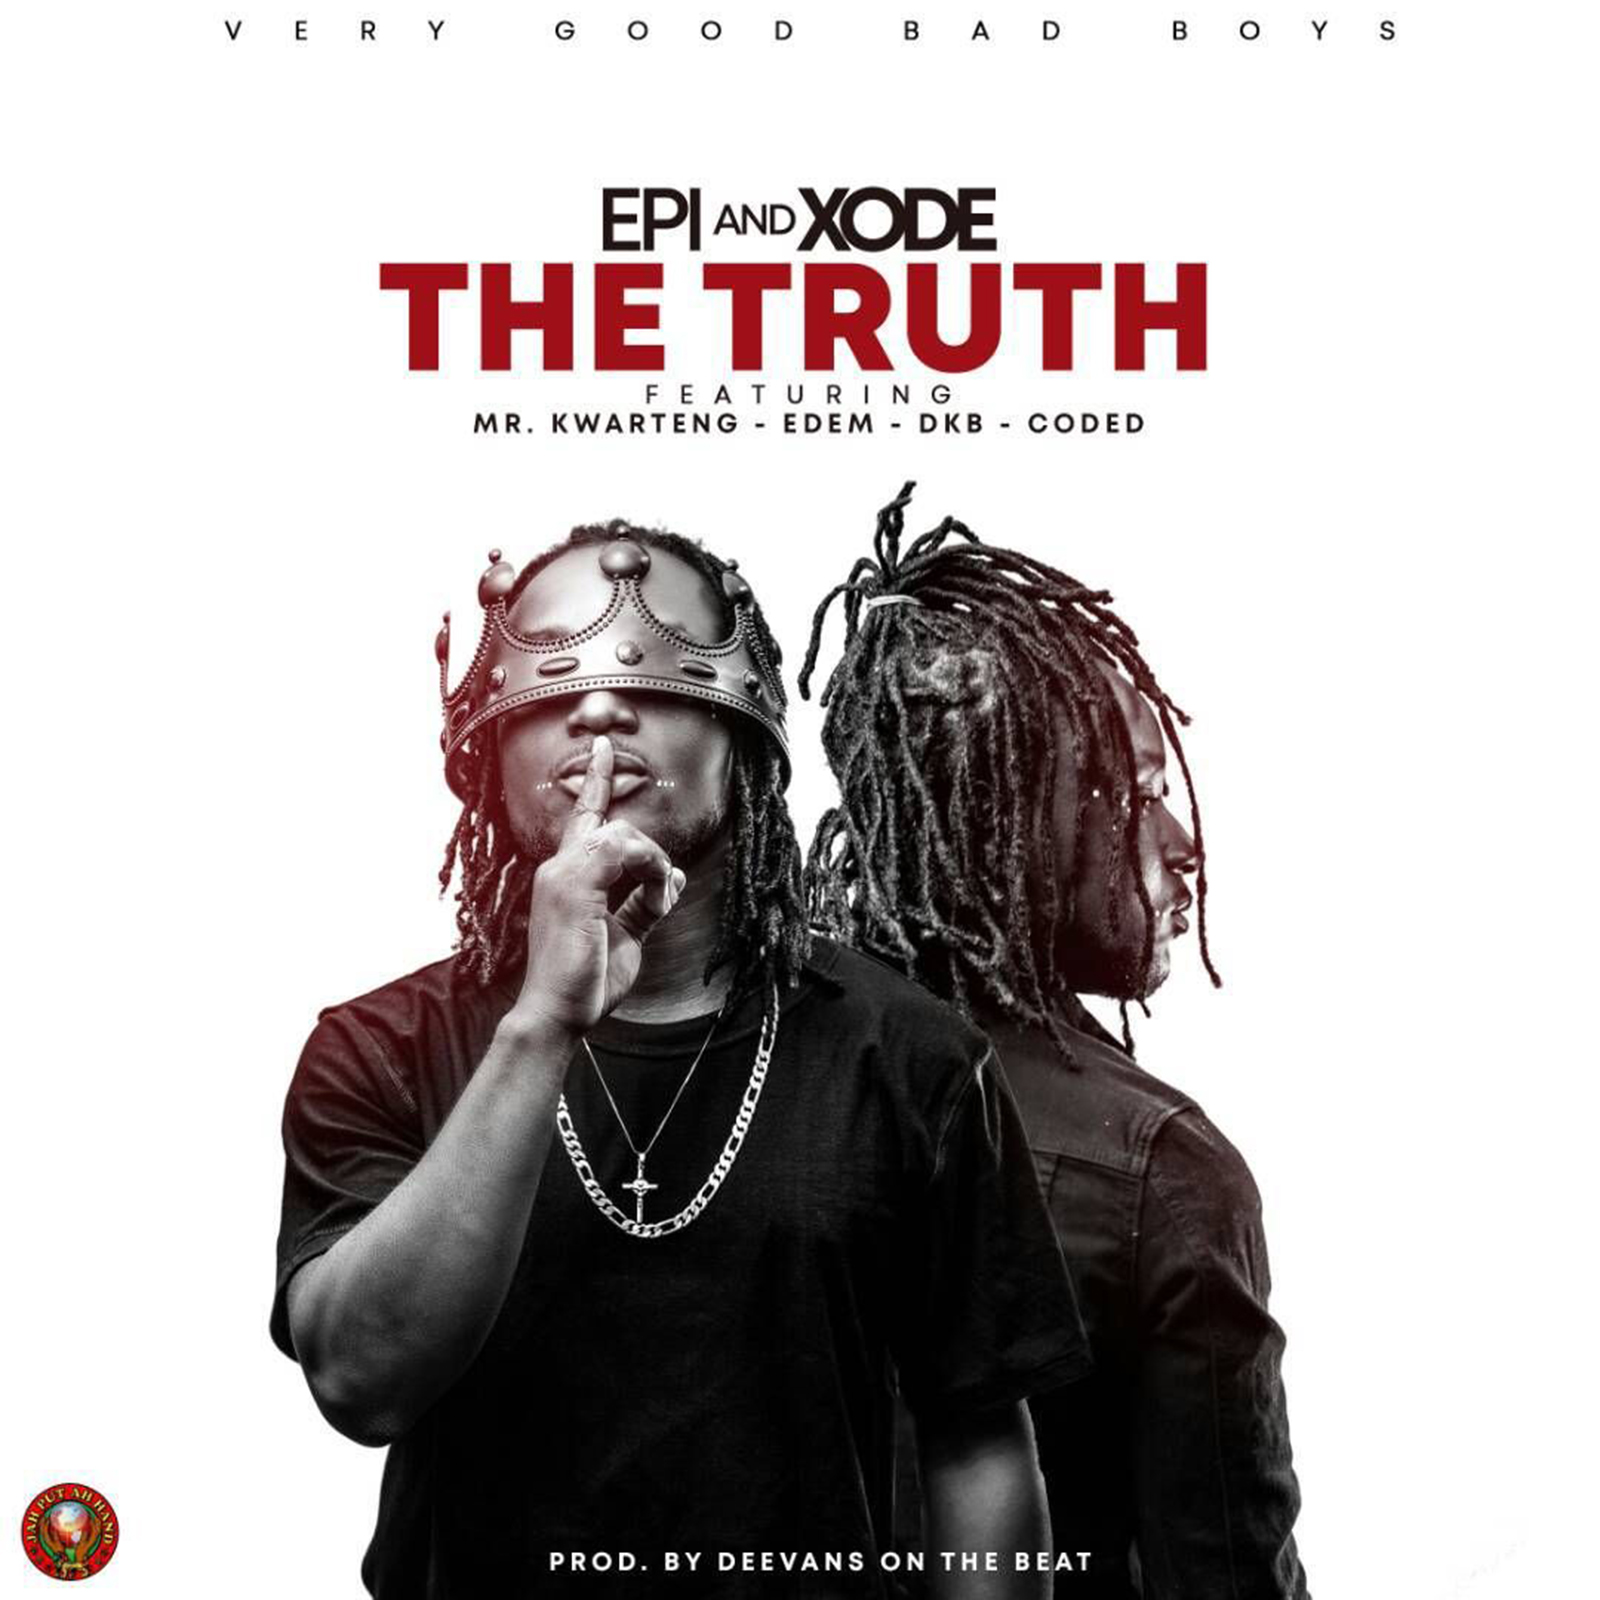 The Truth by EPI and Xode (Epixode)